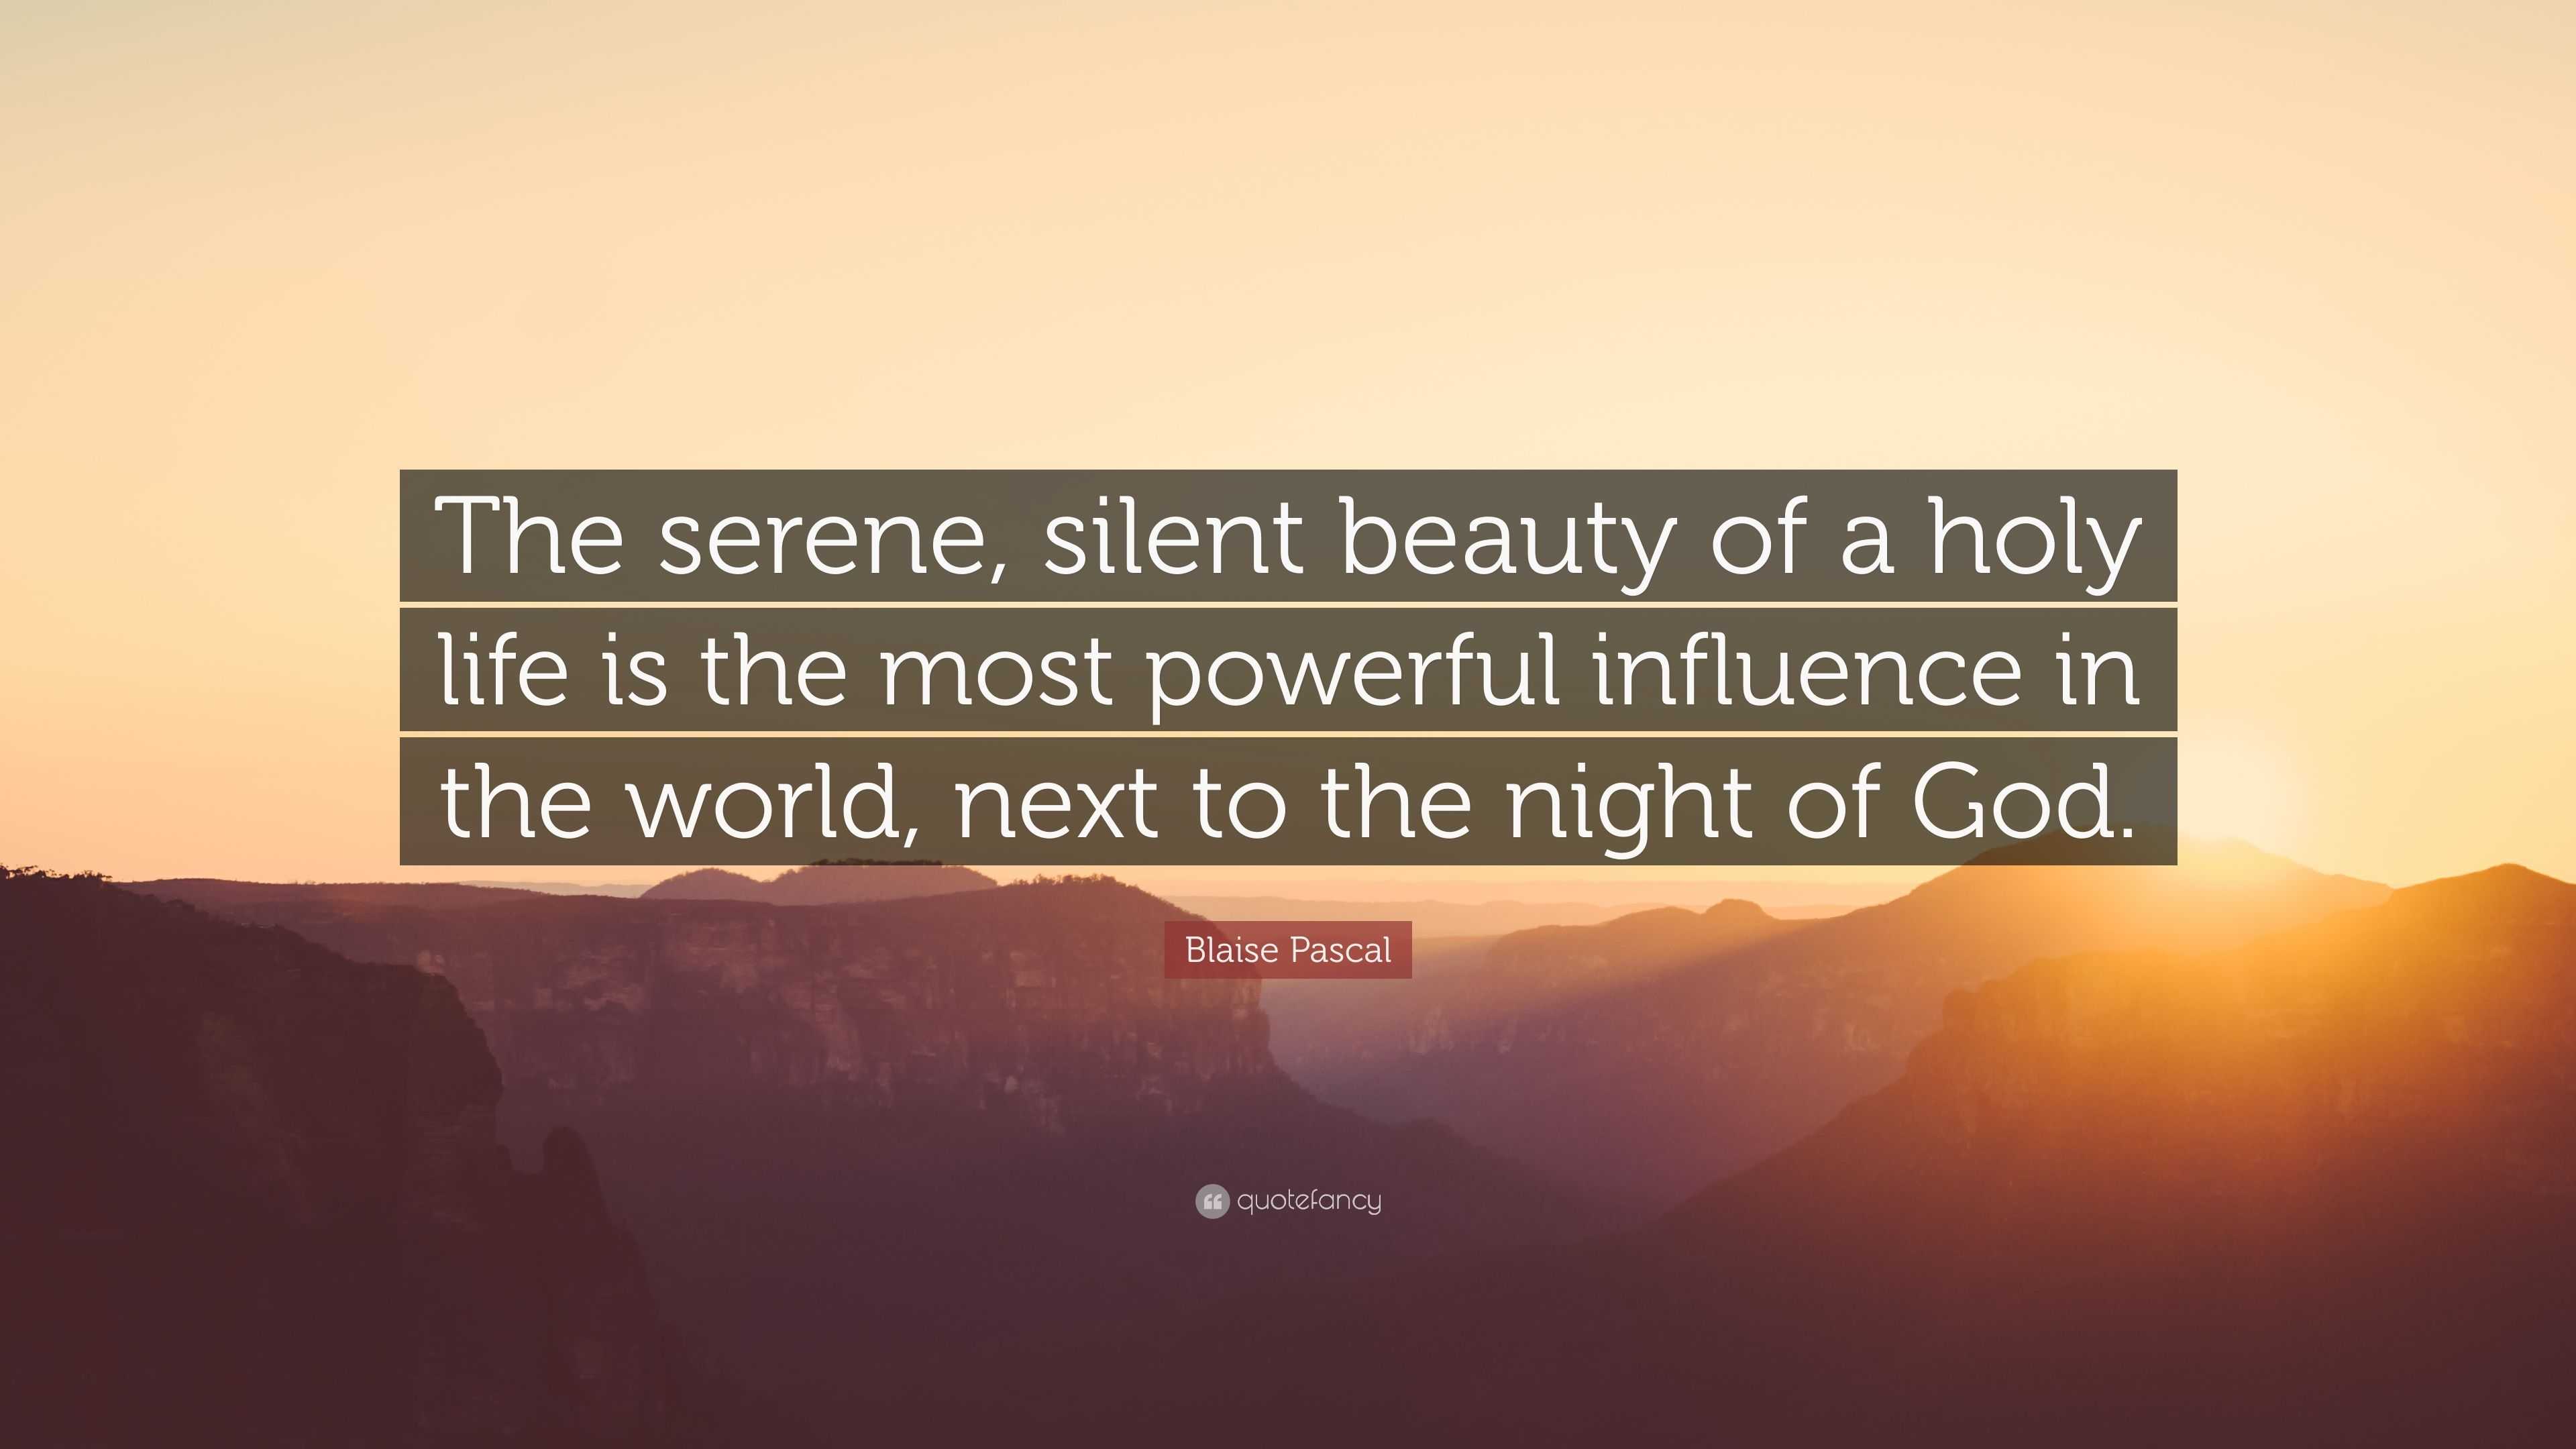 Blaise Pascal Quote “The serene silent beauty of a holy life is the